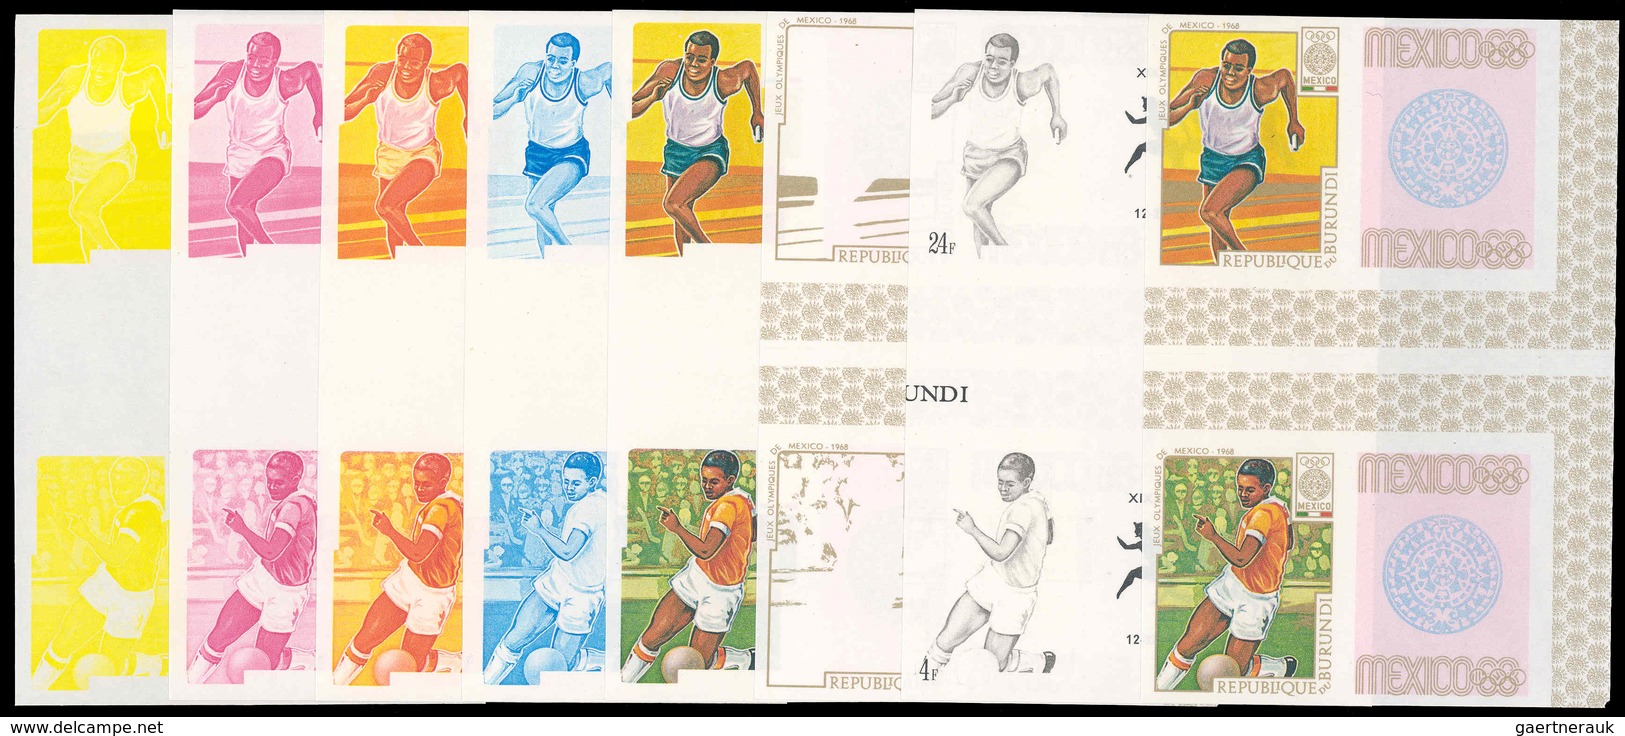 25282 Thematik: Olympische Spiele / olympic games: 1964/1992. Great accumulation with different kinds of P